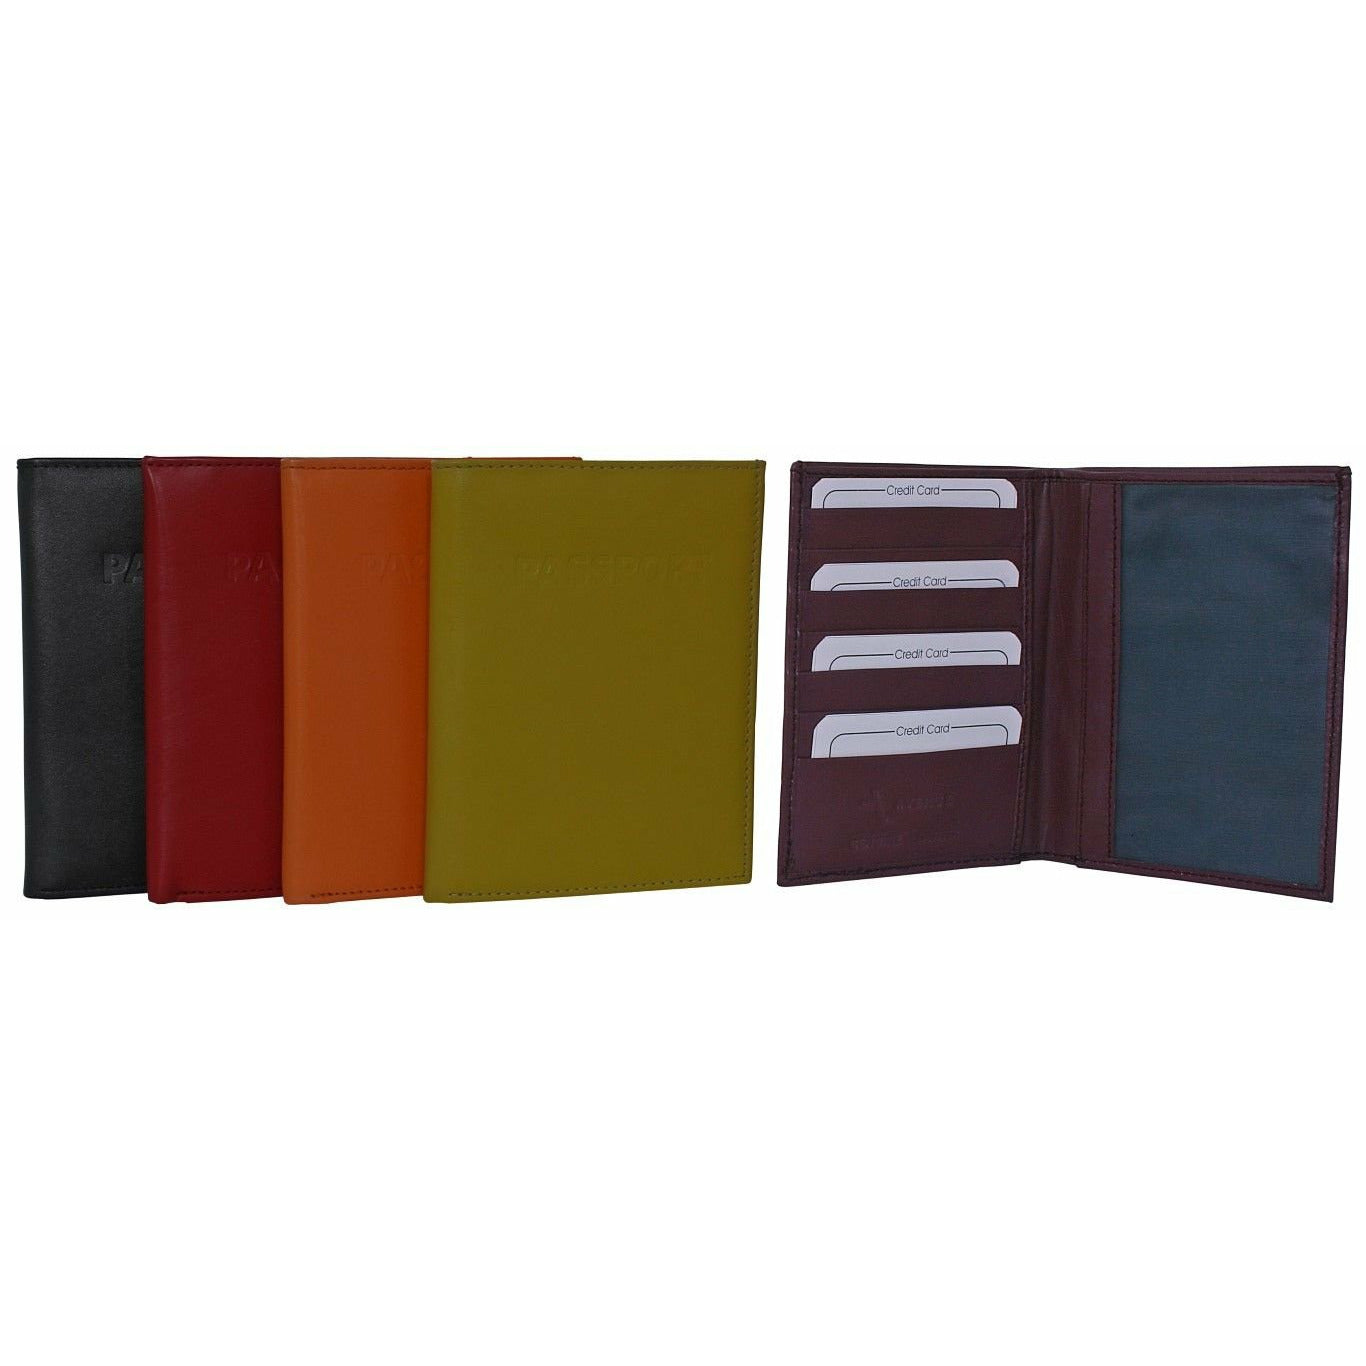 RAINBOW COLLECTION LEATHER PASSPORT WALLET Not specified